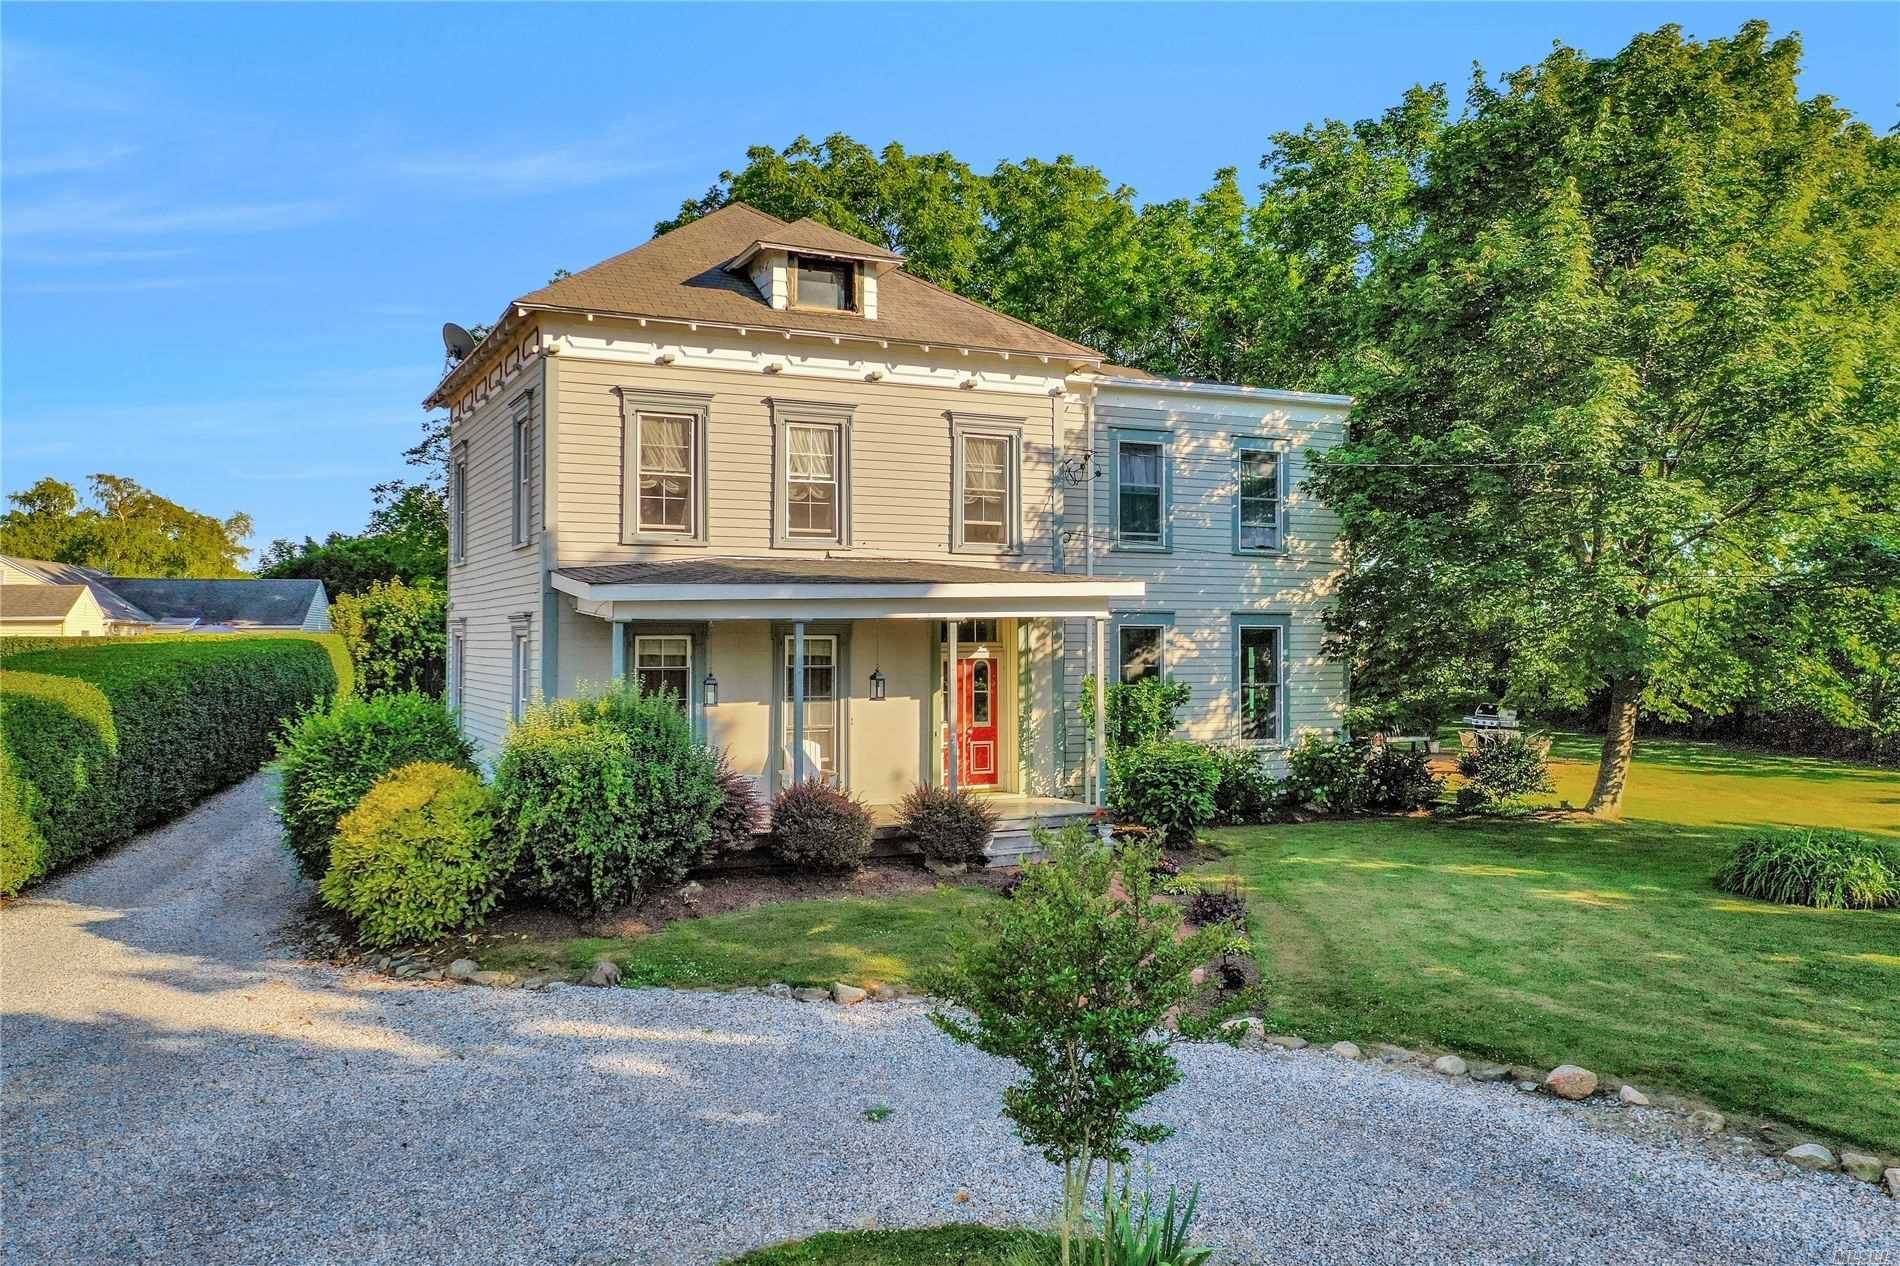 Classic 19th Century Historic Residence This grand gem, built in 1857 is perfect for large gatherings of family and friends and is currently operating as a popular Bed and Breakfast.